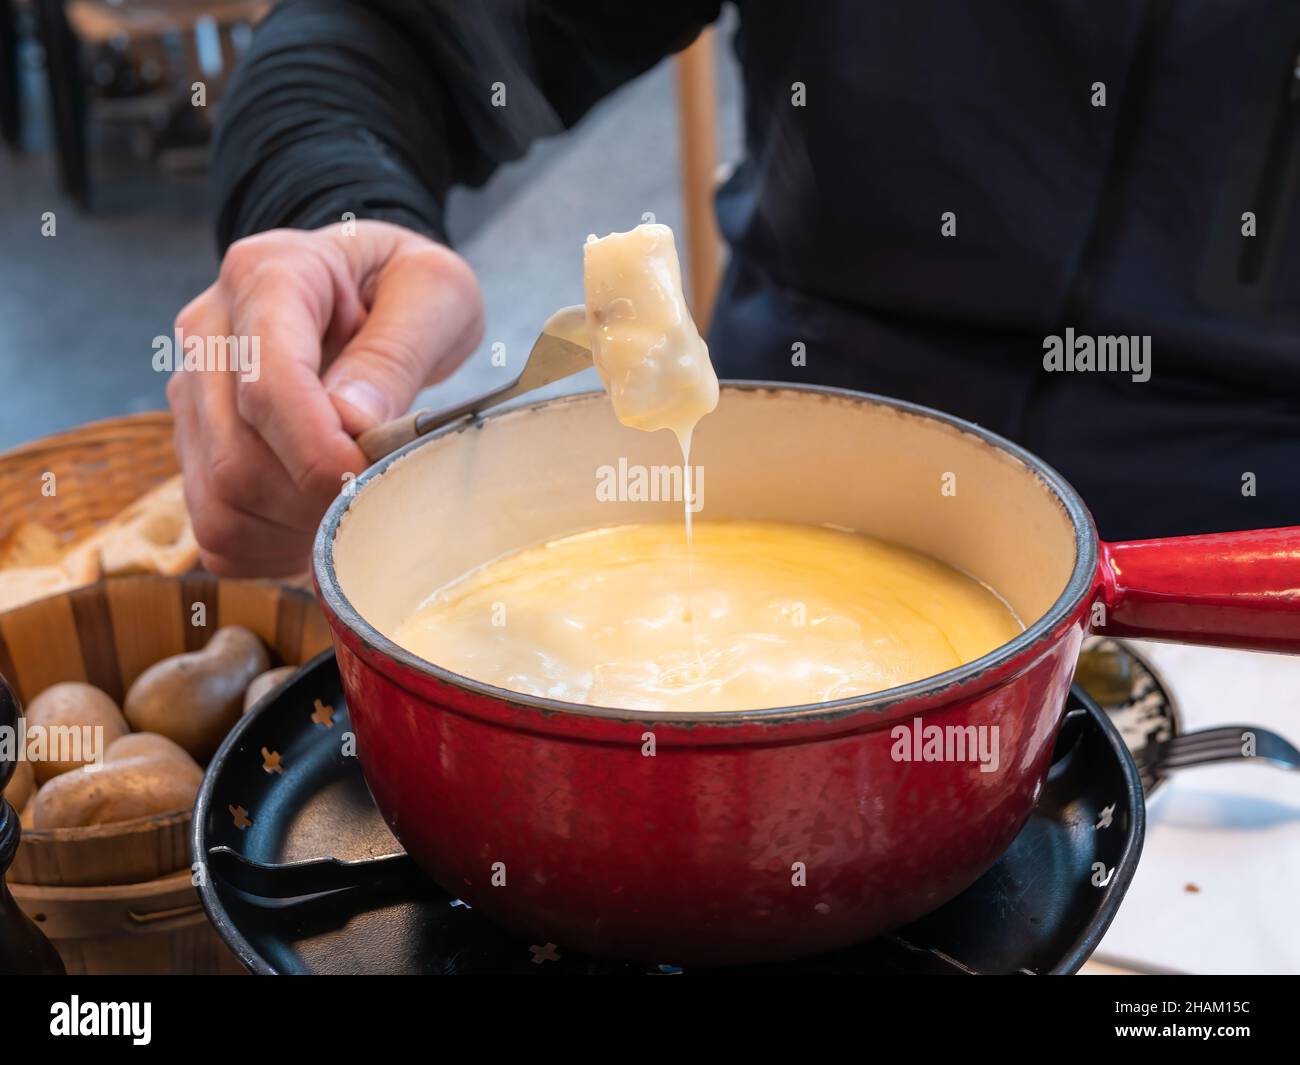 A man’s hand holds on a fork a piece of bread that has been dipped in a cheese fondue pot Stock Photo